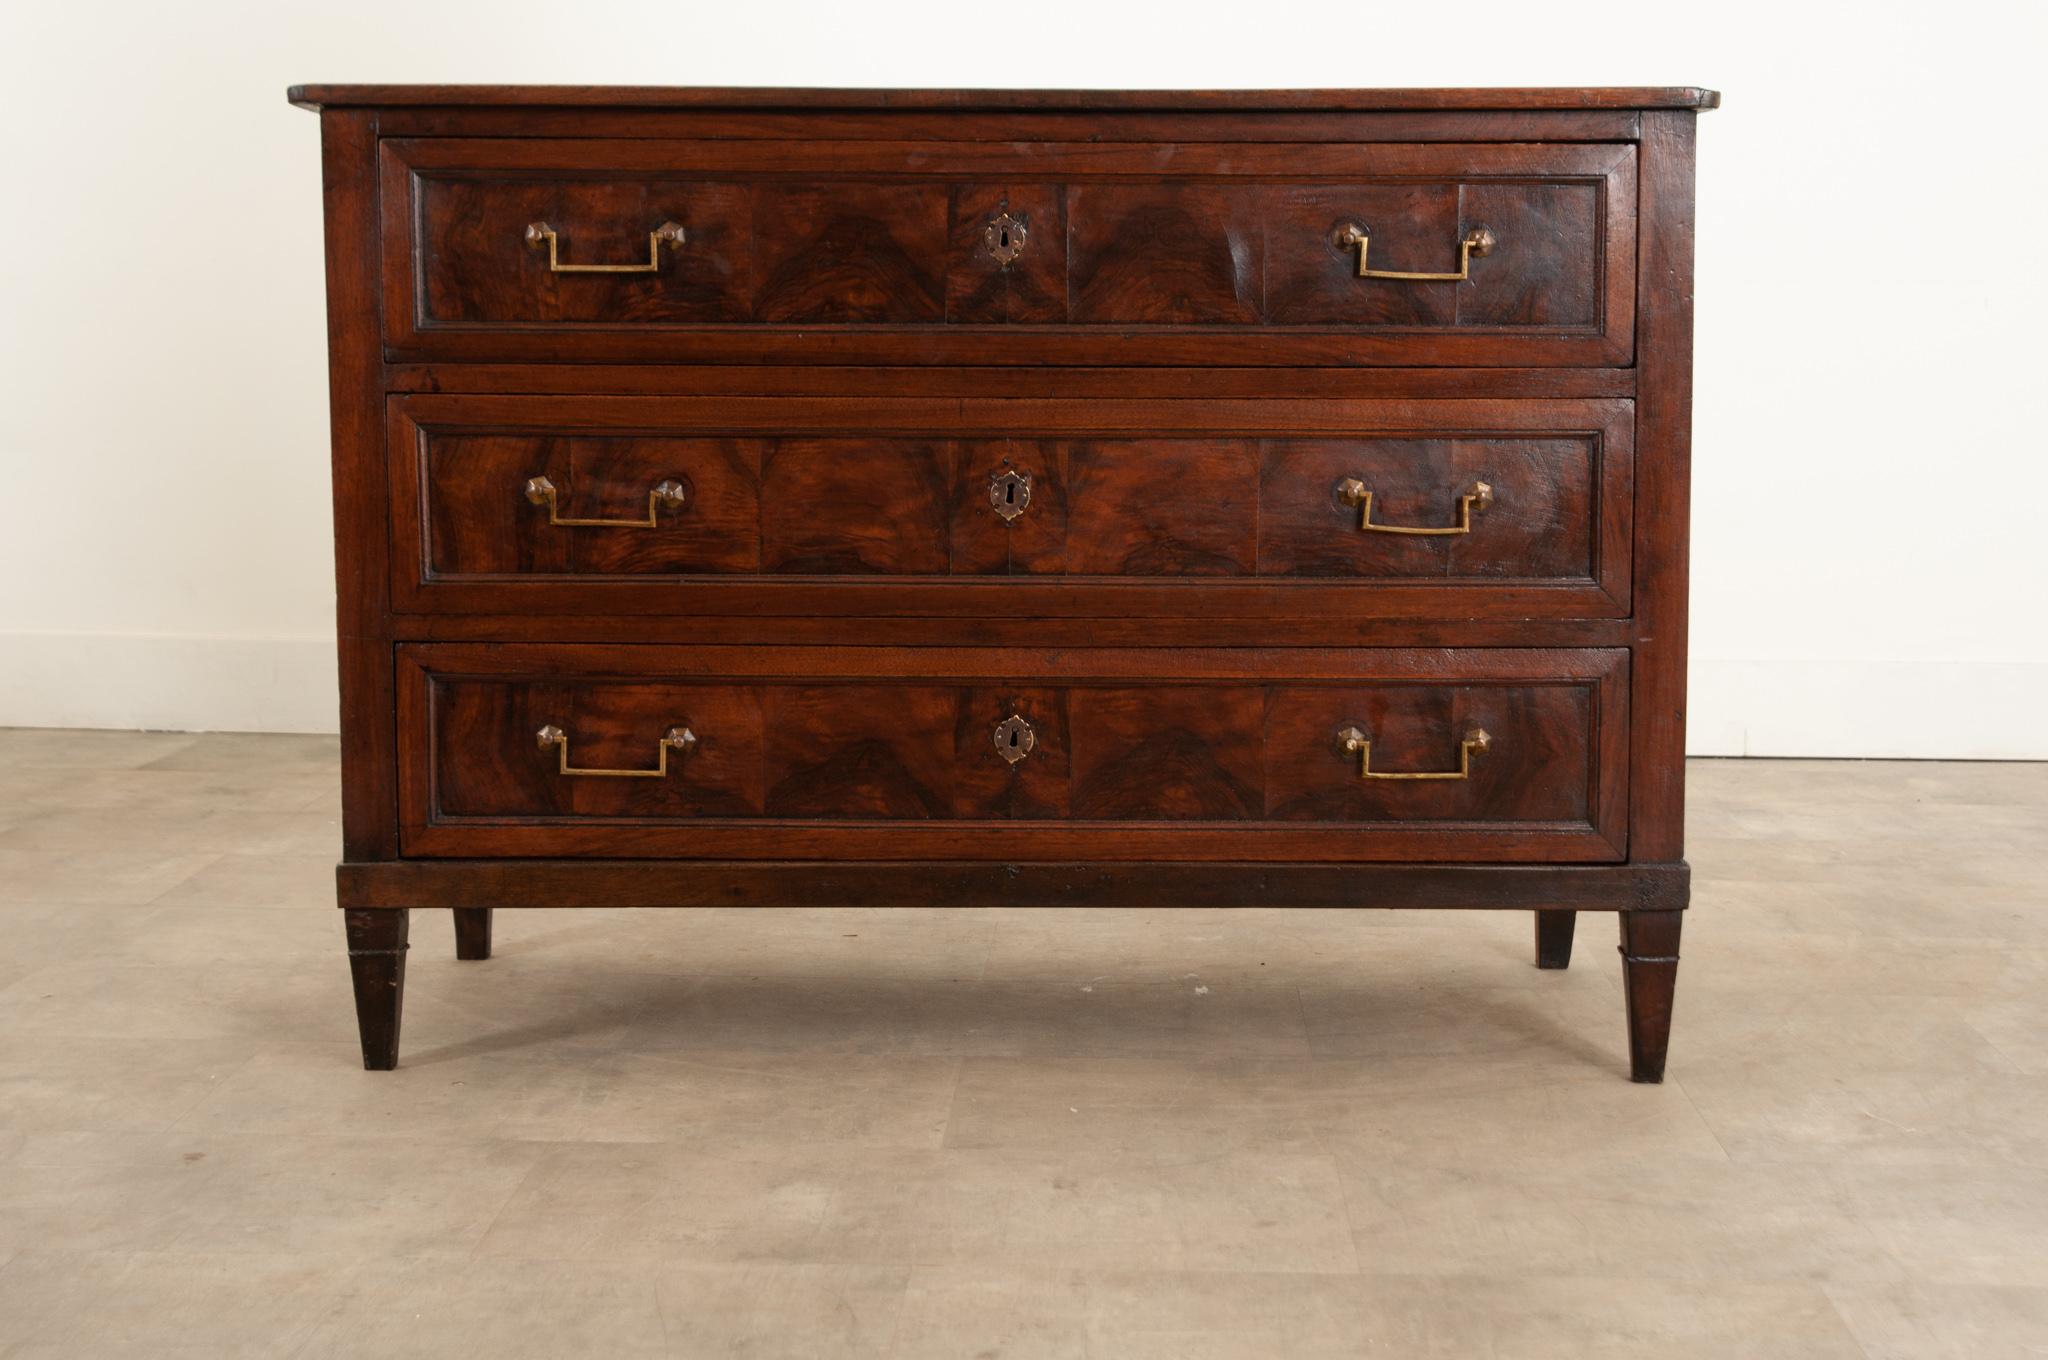 A stylish early 19th Century French commode with a smooth polished top made of a single large board. Hand-crafted in France circa 1810 this commode features three molded drawers with burl walnut panels flanked by canted corners. Each drawer is